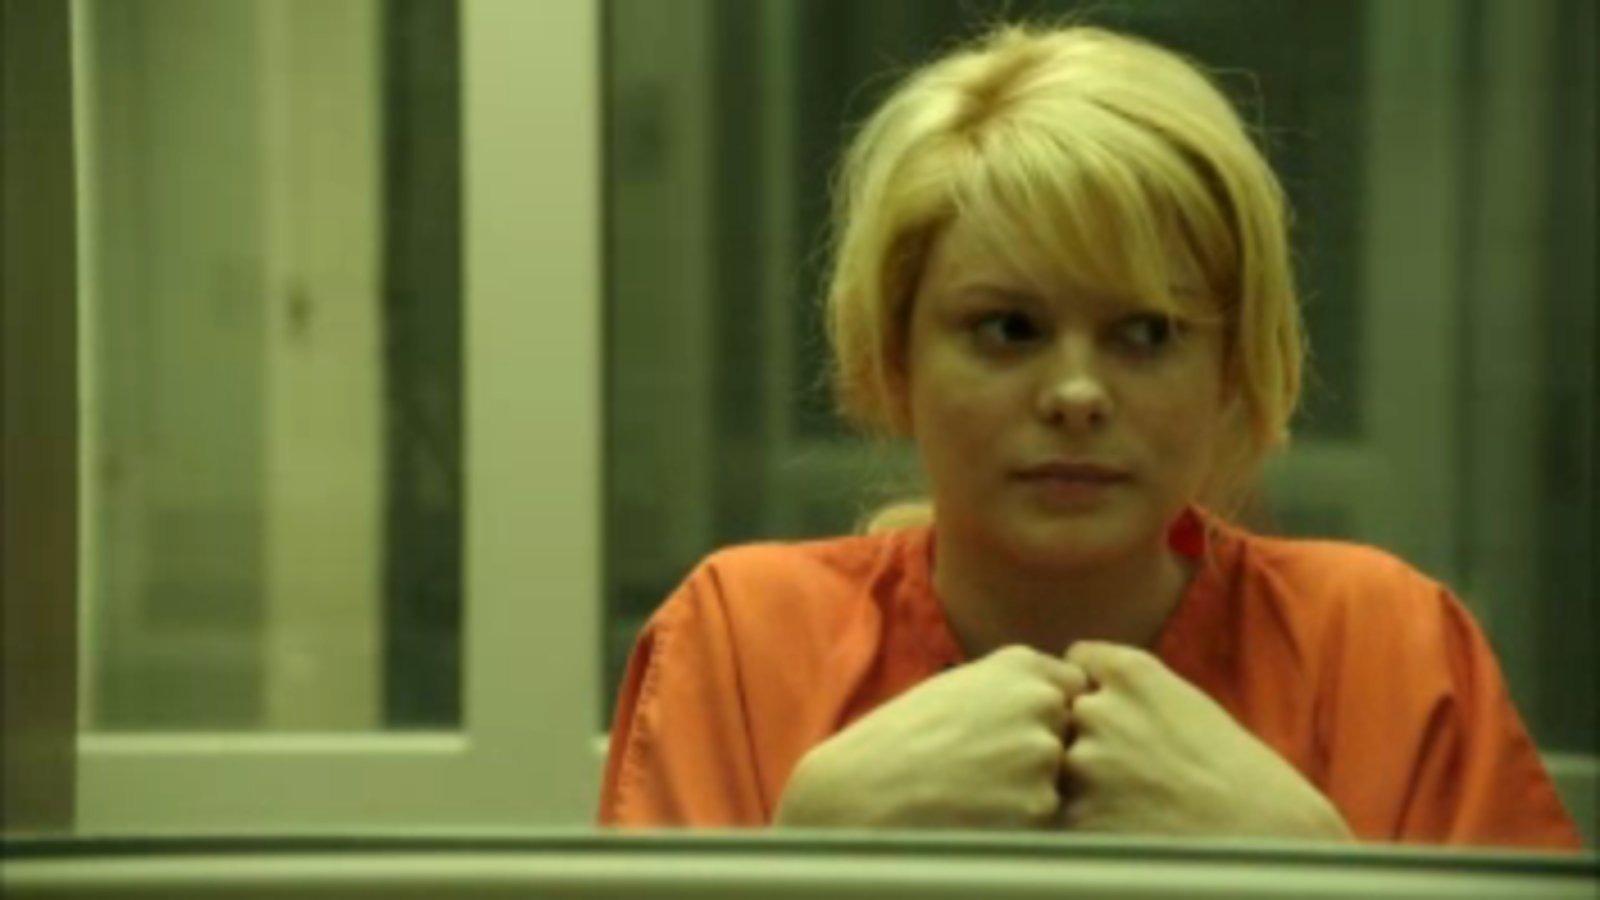 A still of Tracey Fairaway in The Bling Ring (doing the prison monologues)